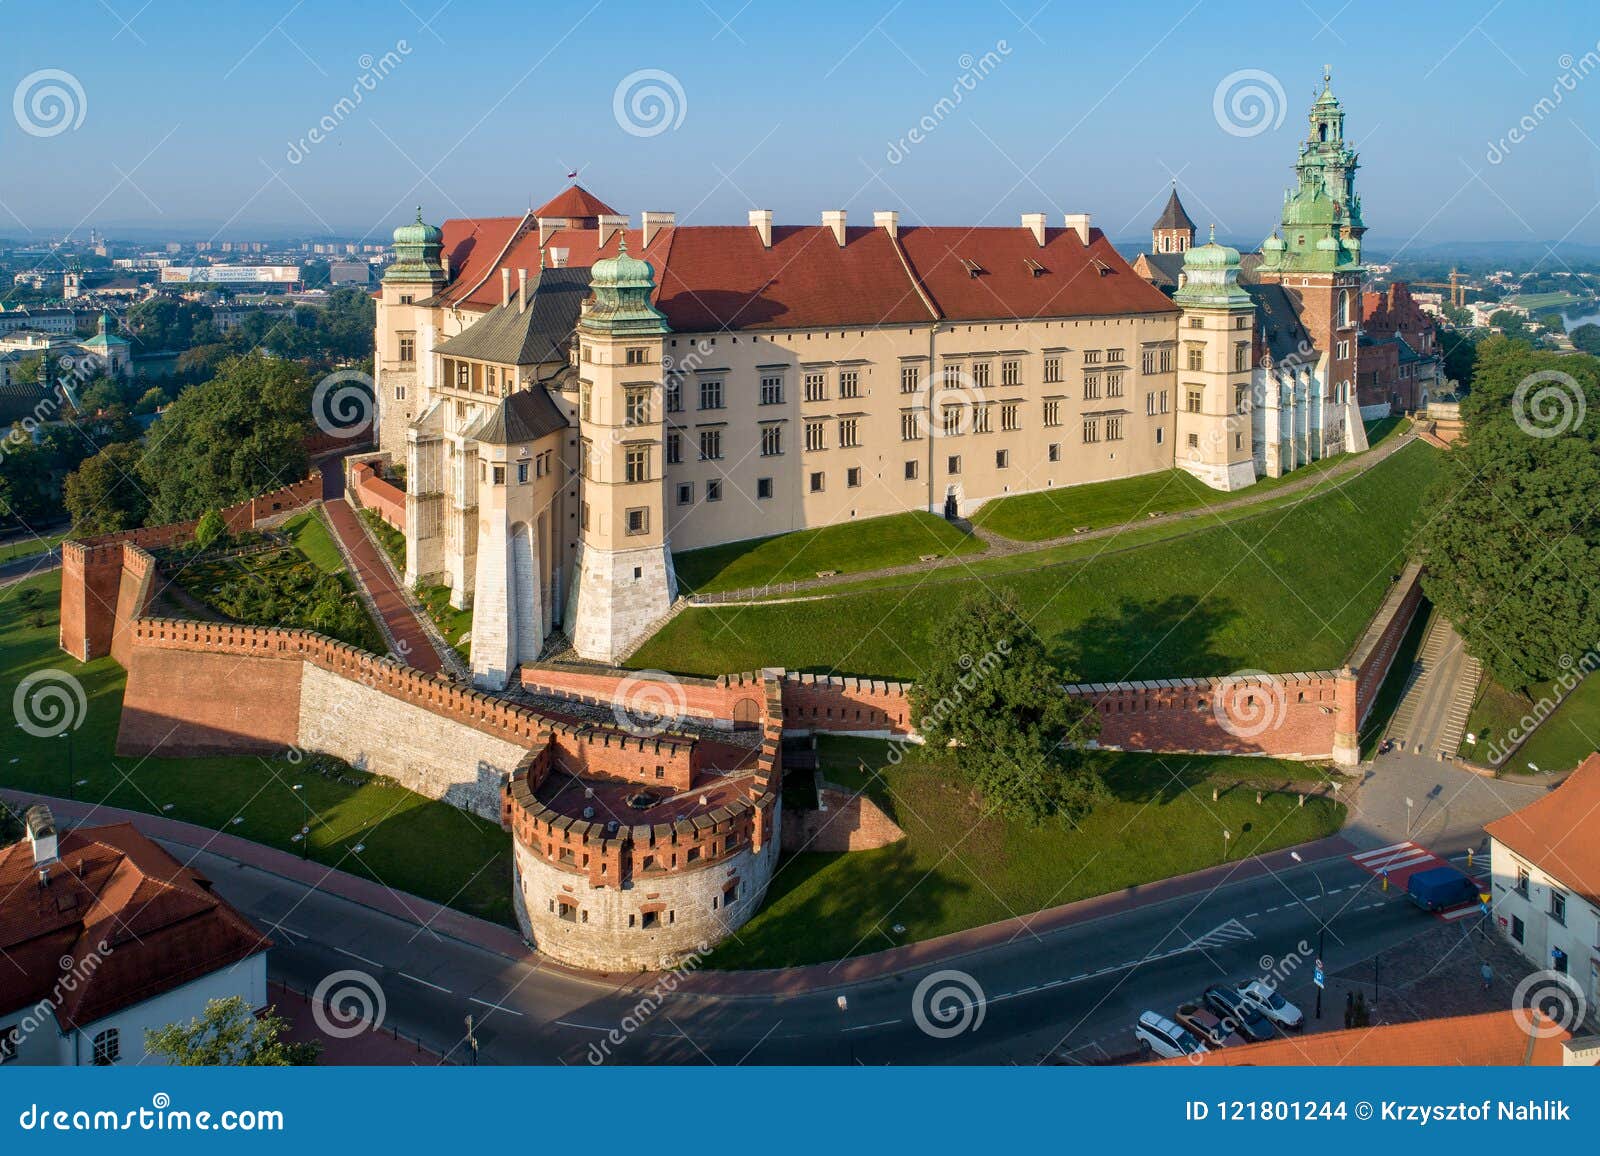 wawel castle and cathedral in krakow, poland. aerial view at sun